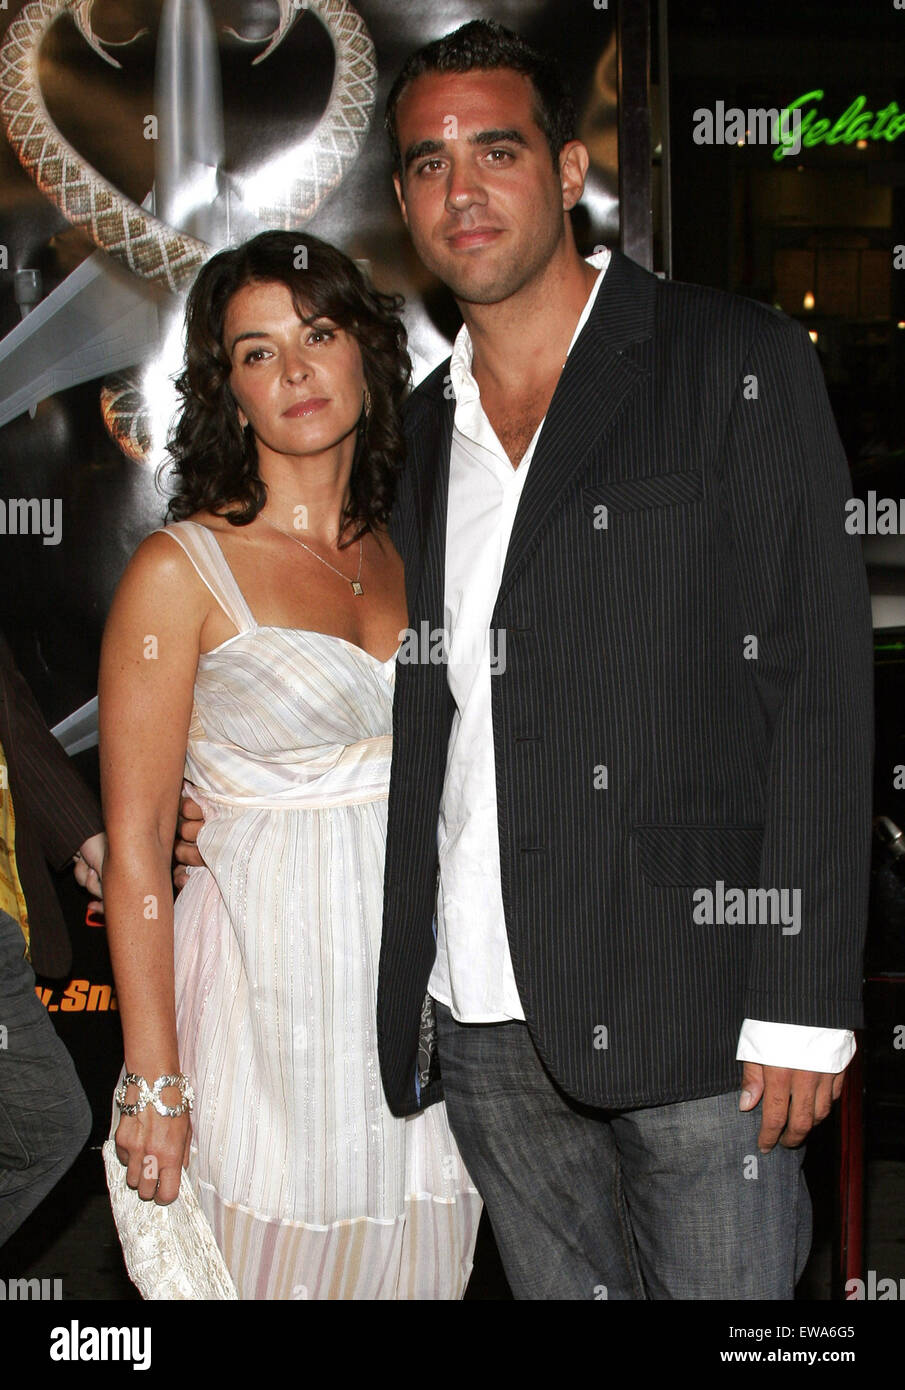 Annabella Sciorra and Bobby Cannavale attend the Premiere of 'Snakes on a Plane' held at the Grauman's Chinese Theater. Stock Photo